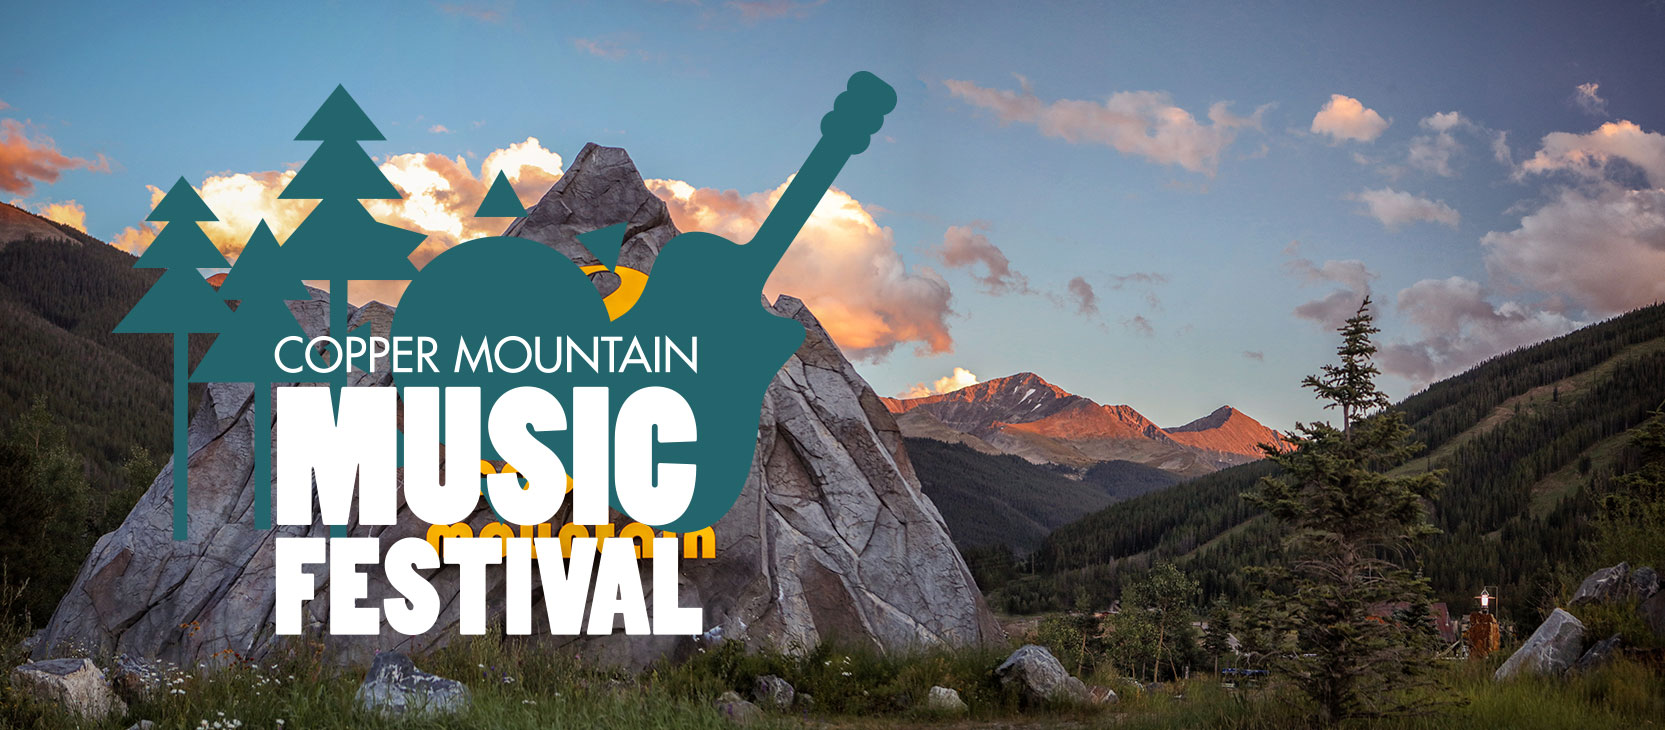 Copper Mountain Music Festival! Summit Express